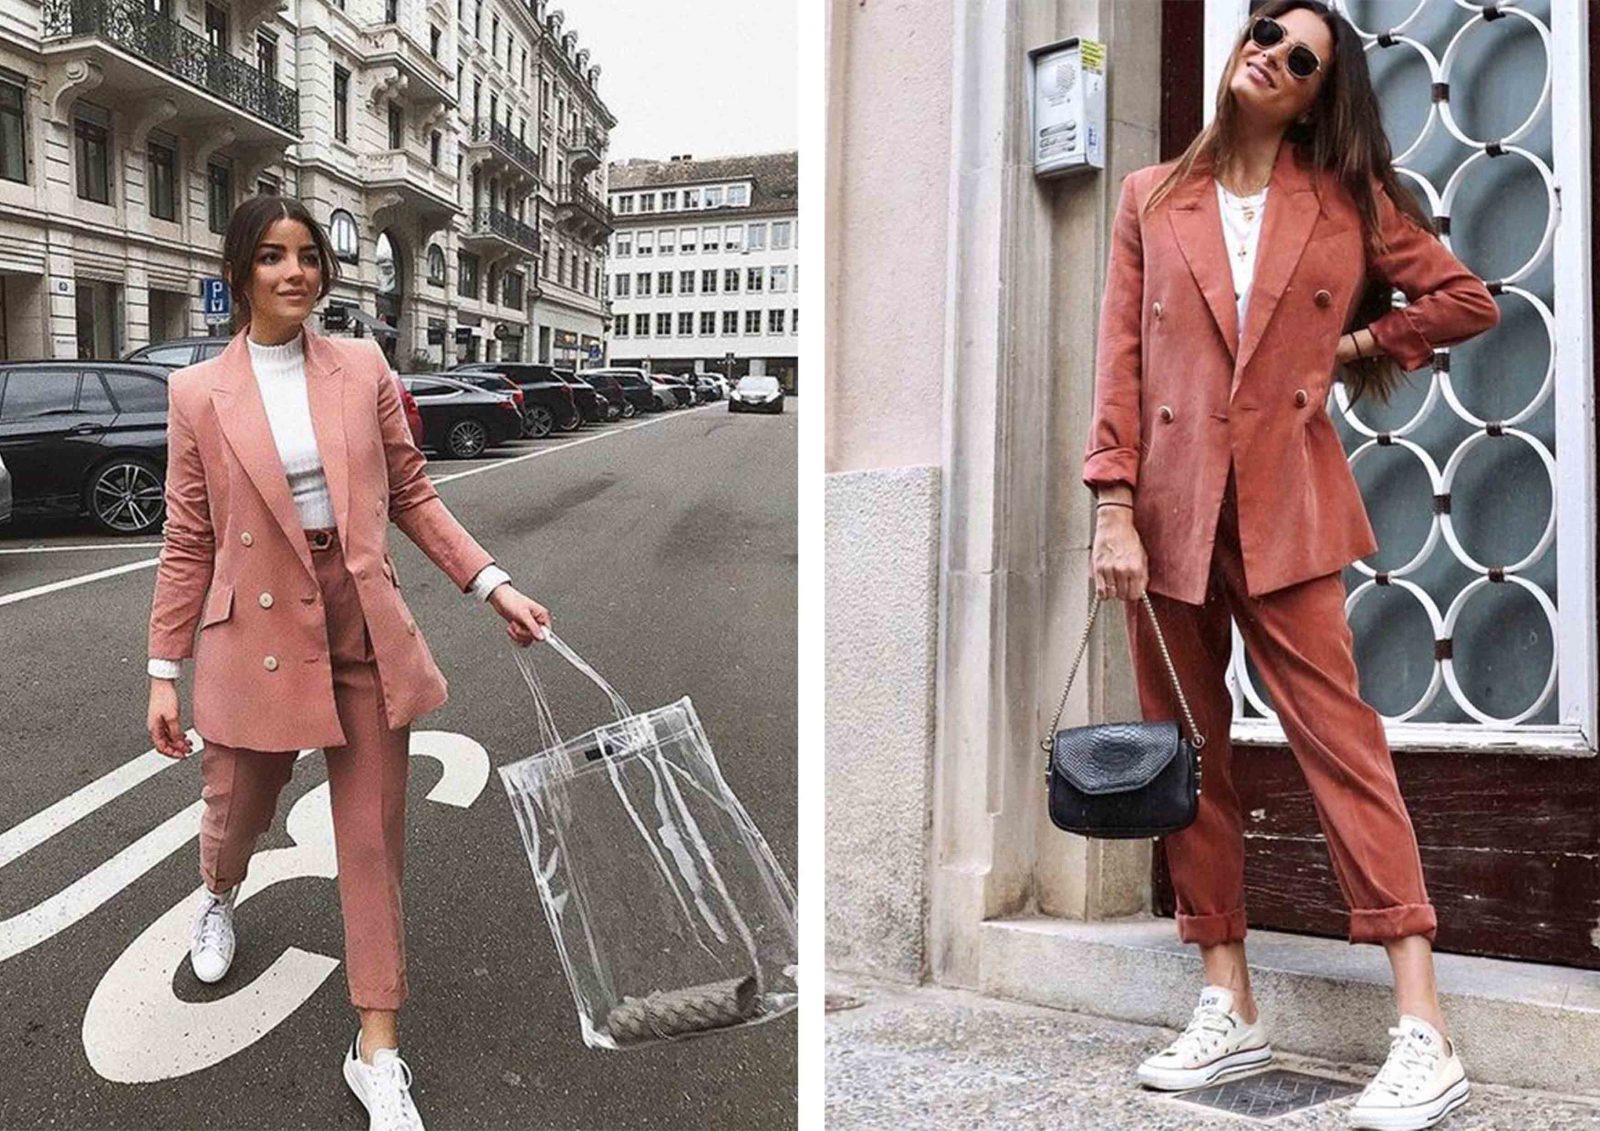 Women Suits and Sneaker Trend 